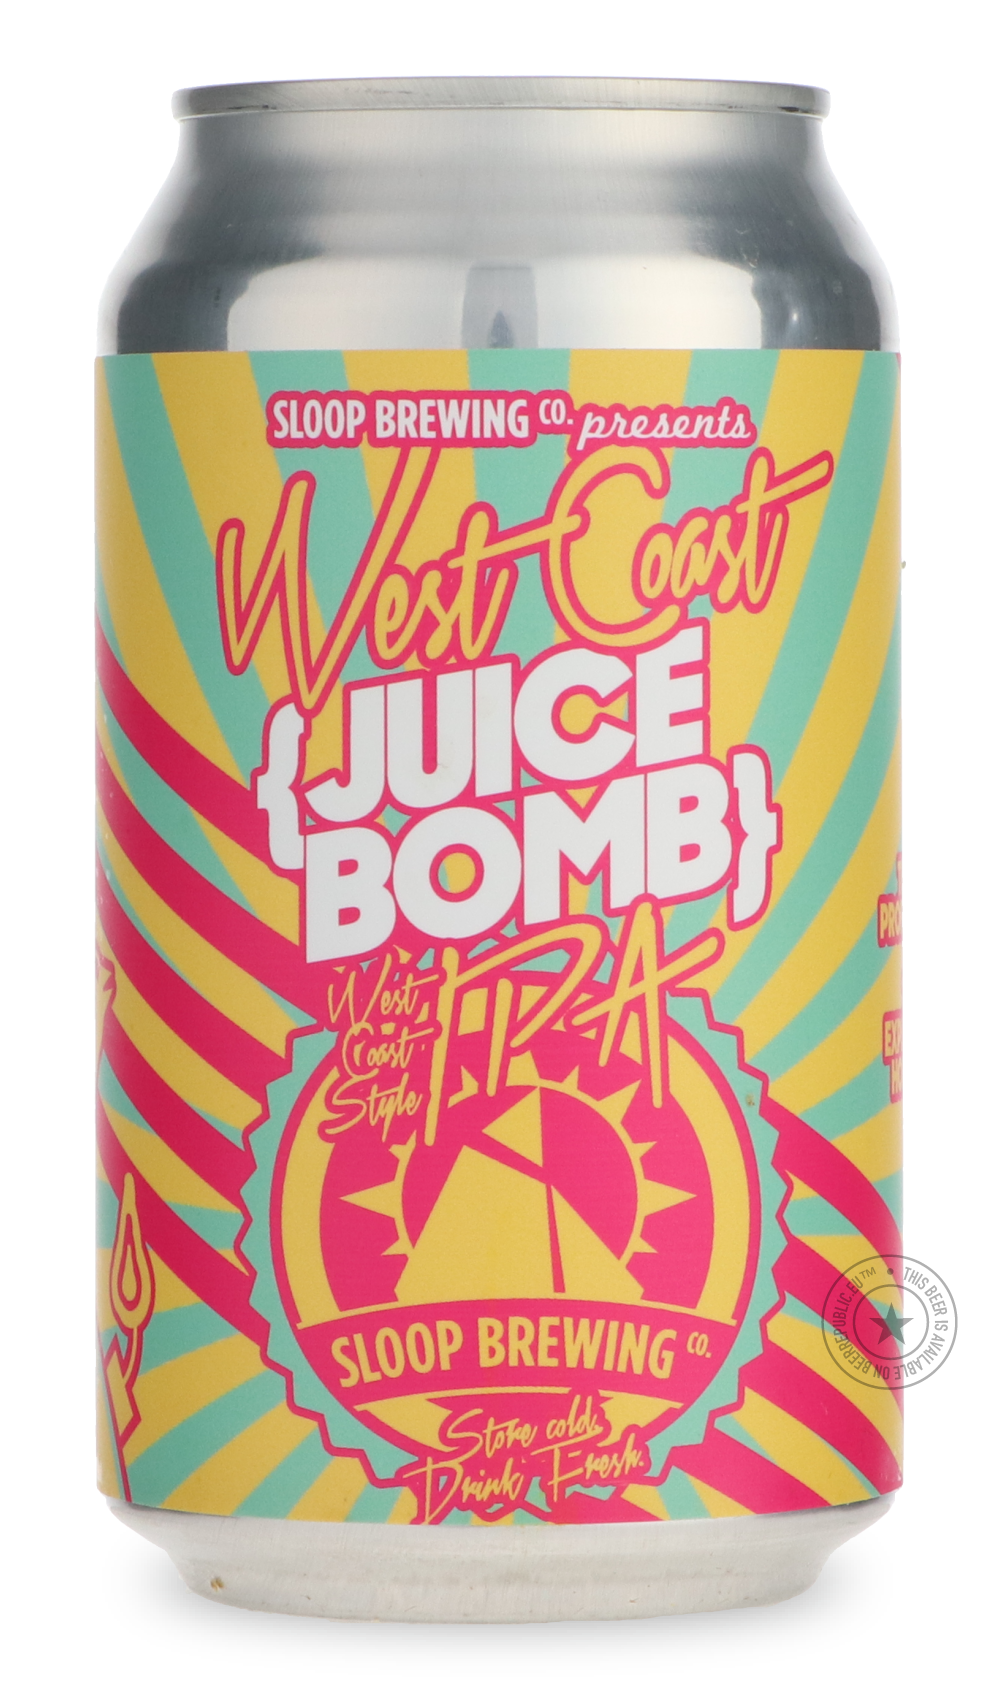 -Sloop- West Coast Juice Bomb-IPA- Only @ Beer Republic - The best online beer store for American & Canadian craft beer - Buy beer online from the USA and Canada - Bier online kopen - Amerikaans bier kopen - Craft beer store - Craft beer kopen - Amerikanisch bier kaufen - Bier online kaufen - Acheter biere online - IPA - Stout - Porter - New England IPA - Hazy IPA - Imperial Stout - Barrel Aged - Barrel Aged Imperial Stout - Brown - Dark beer - Blond - Blonde - Pilsner - Lager - Wheat - Weizen - Amber - Bar